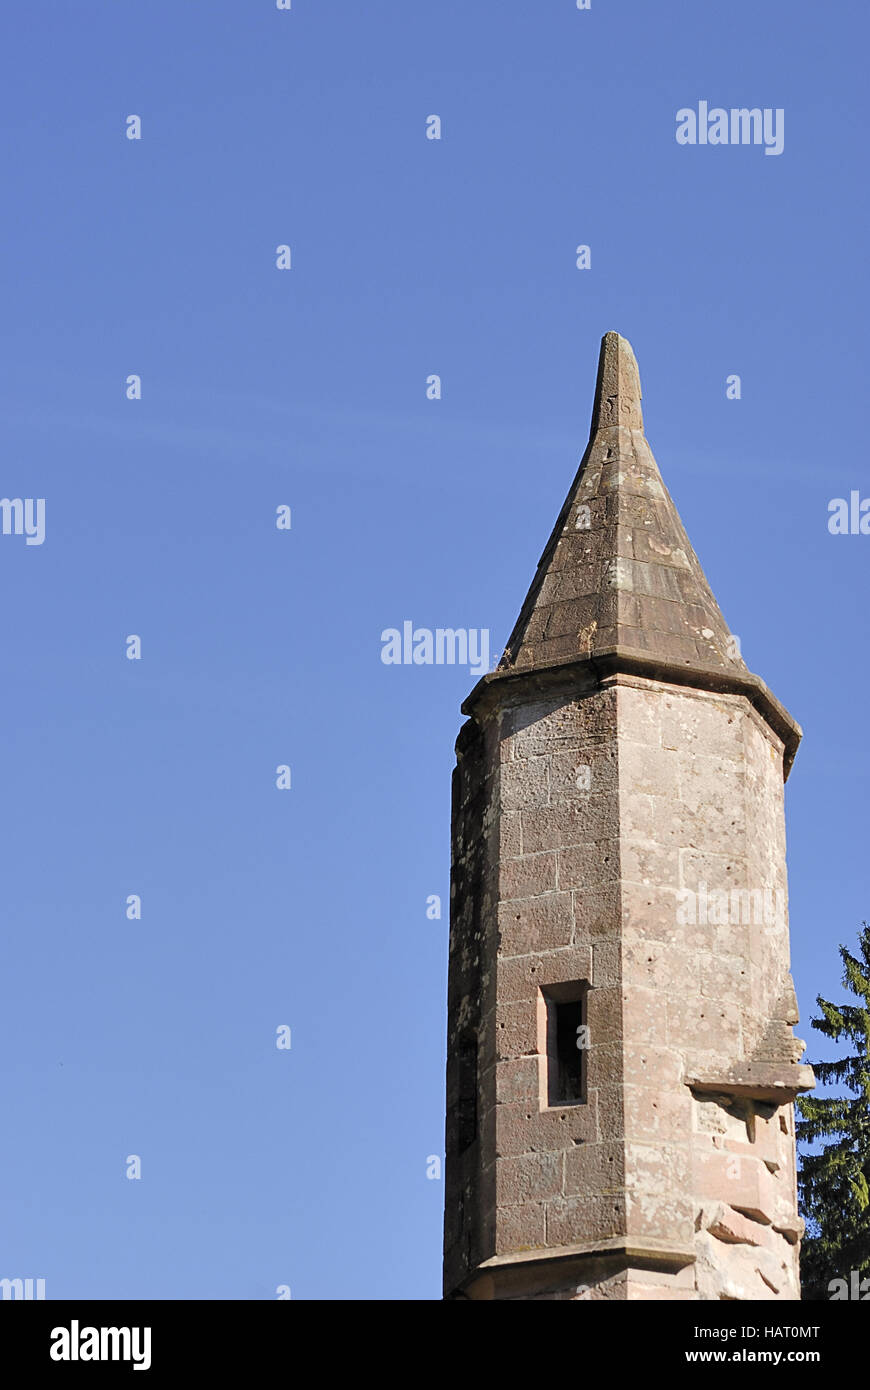 turmspitze - pointed tower 2 Stock Photo